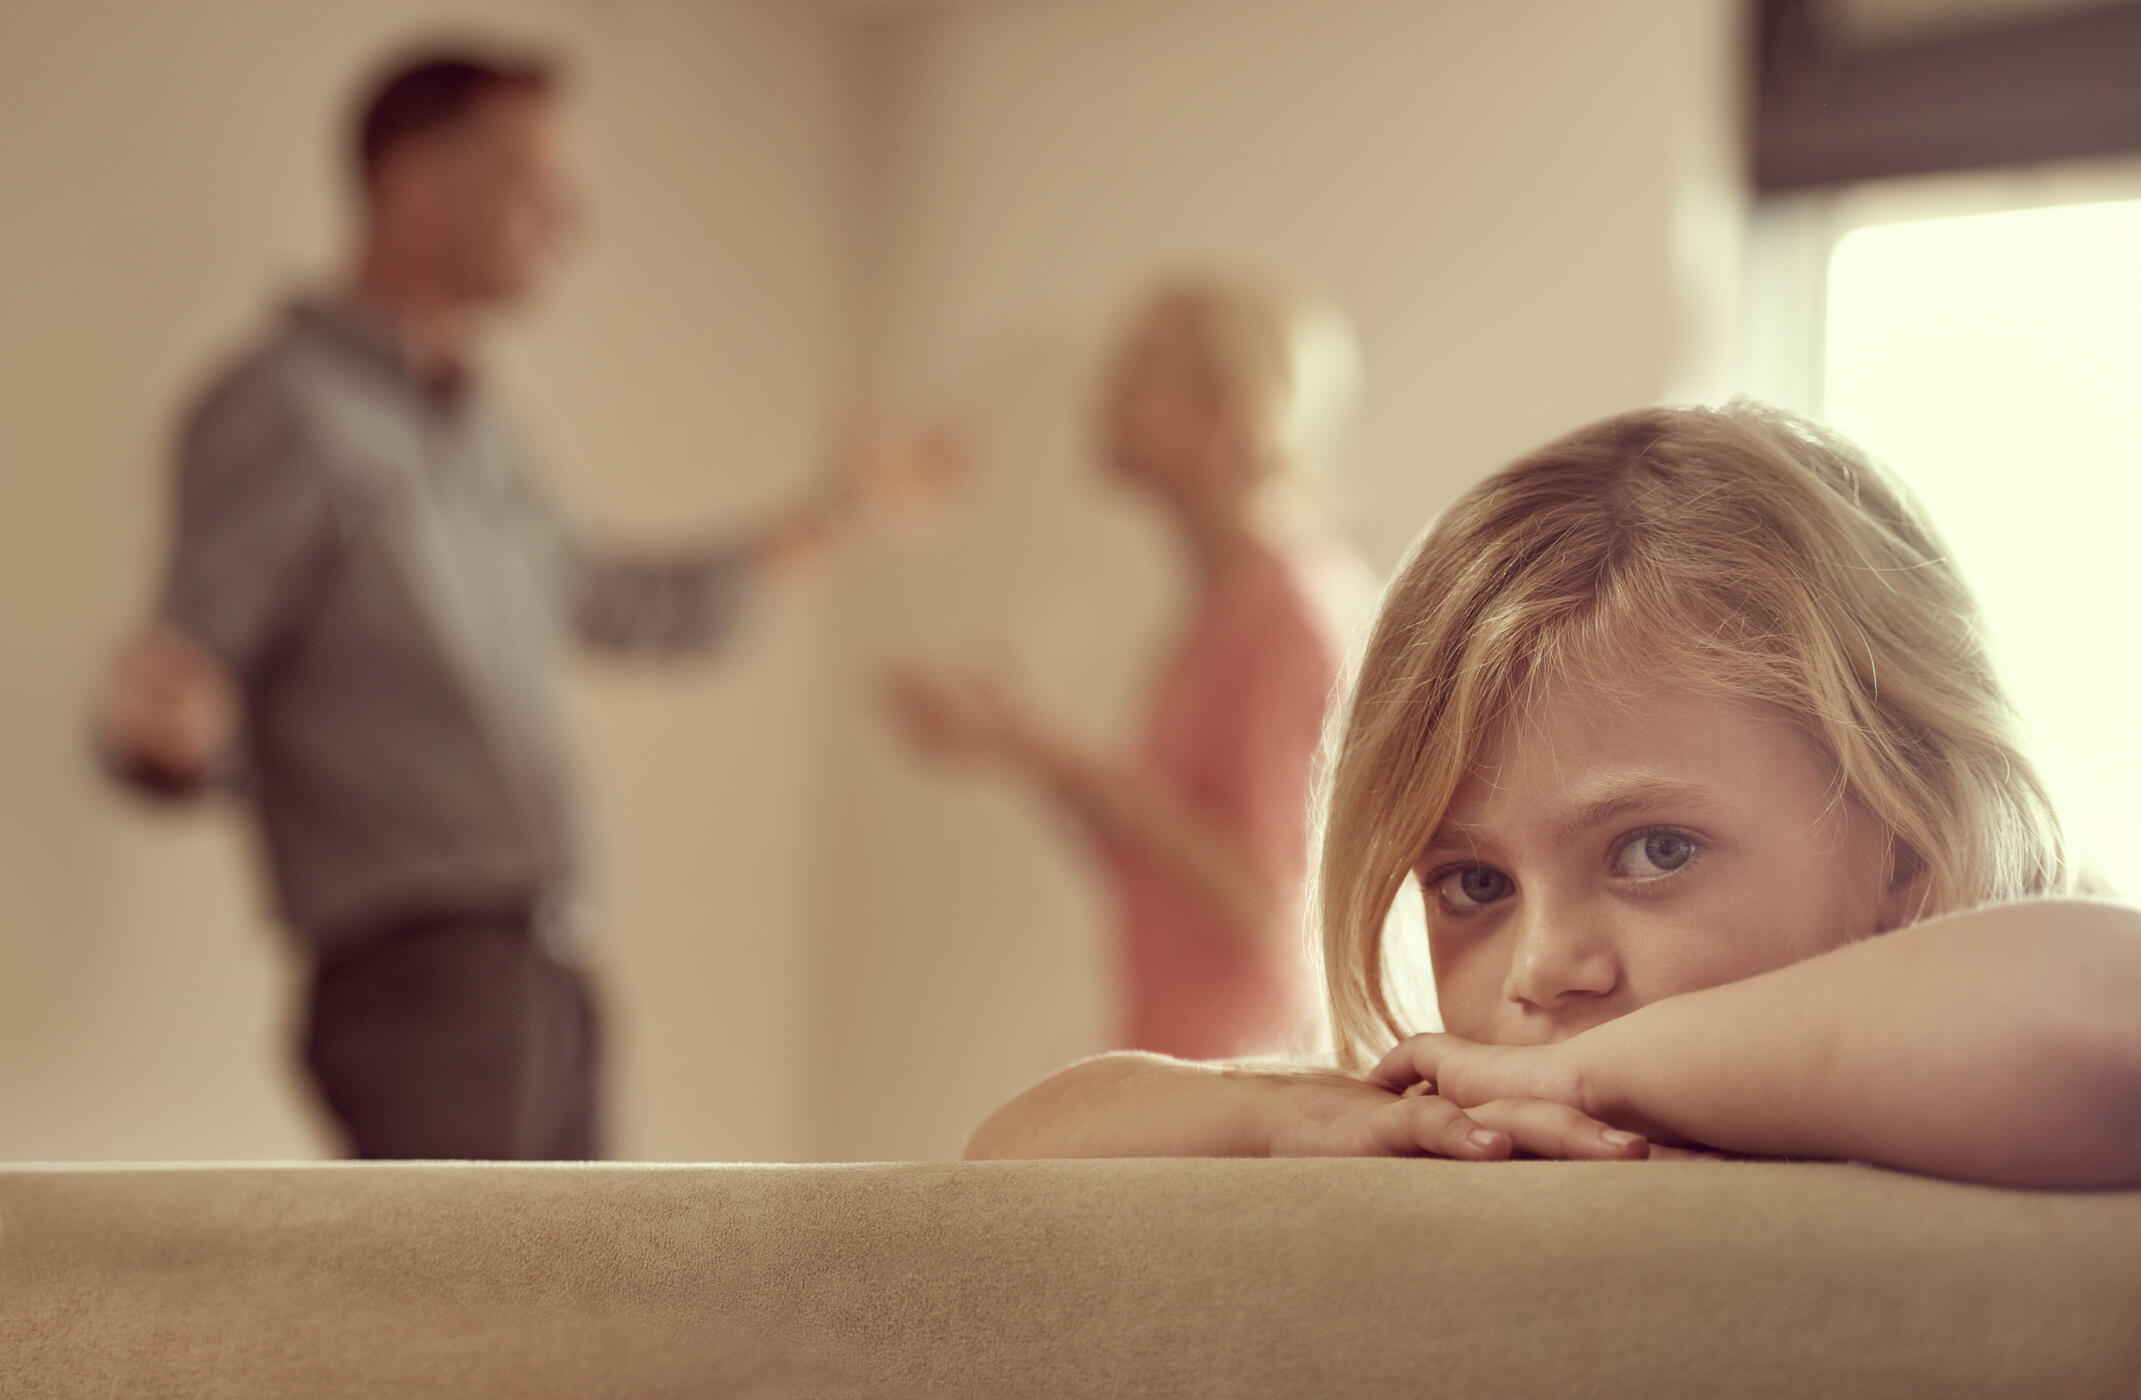 A child sadly leaning on a couch while in the background a blurry image of a woman and man look like they're fighting with each other. 